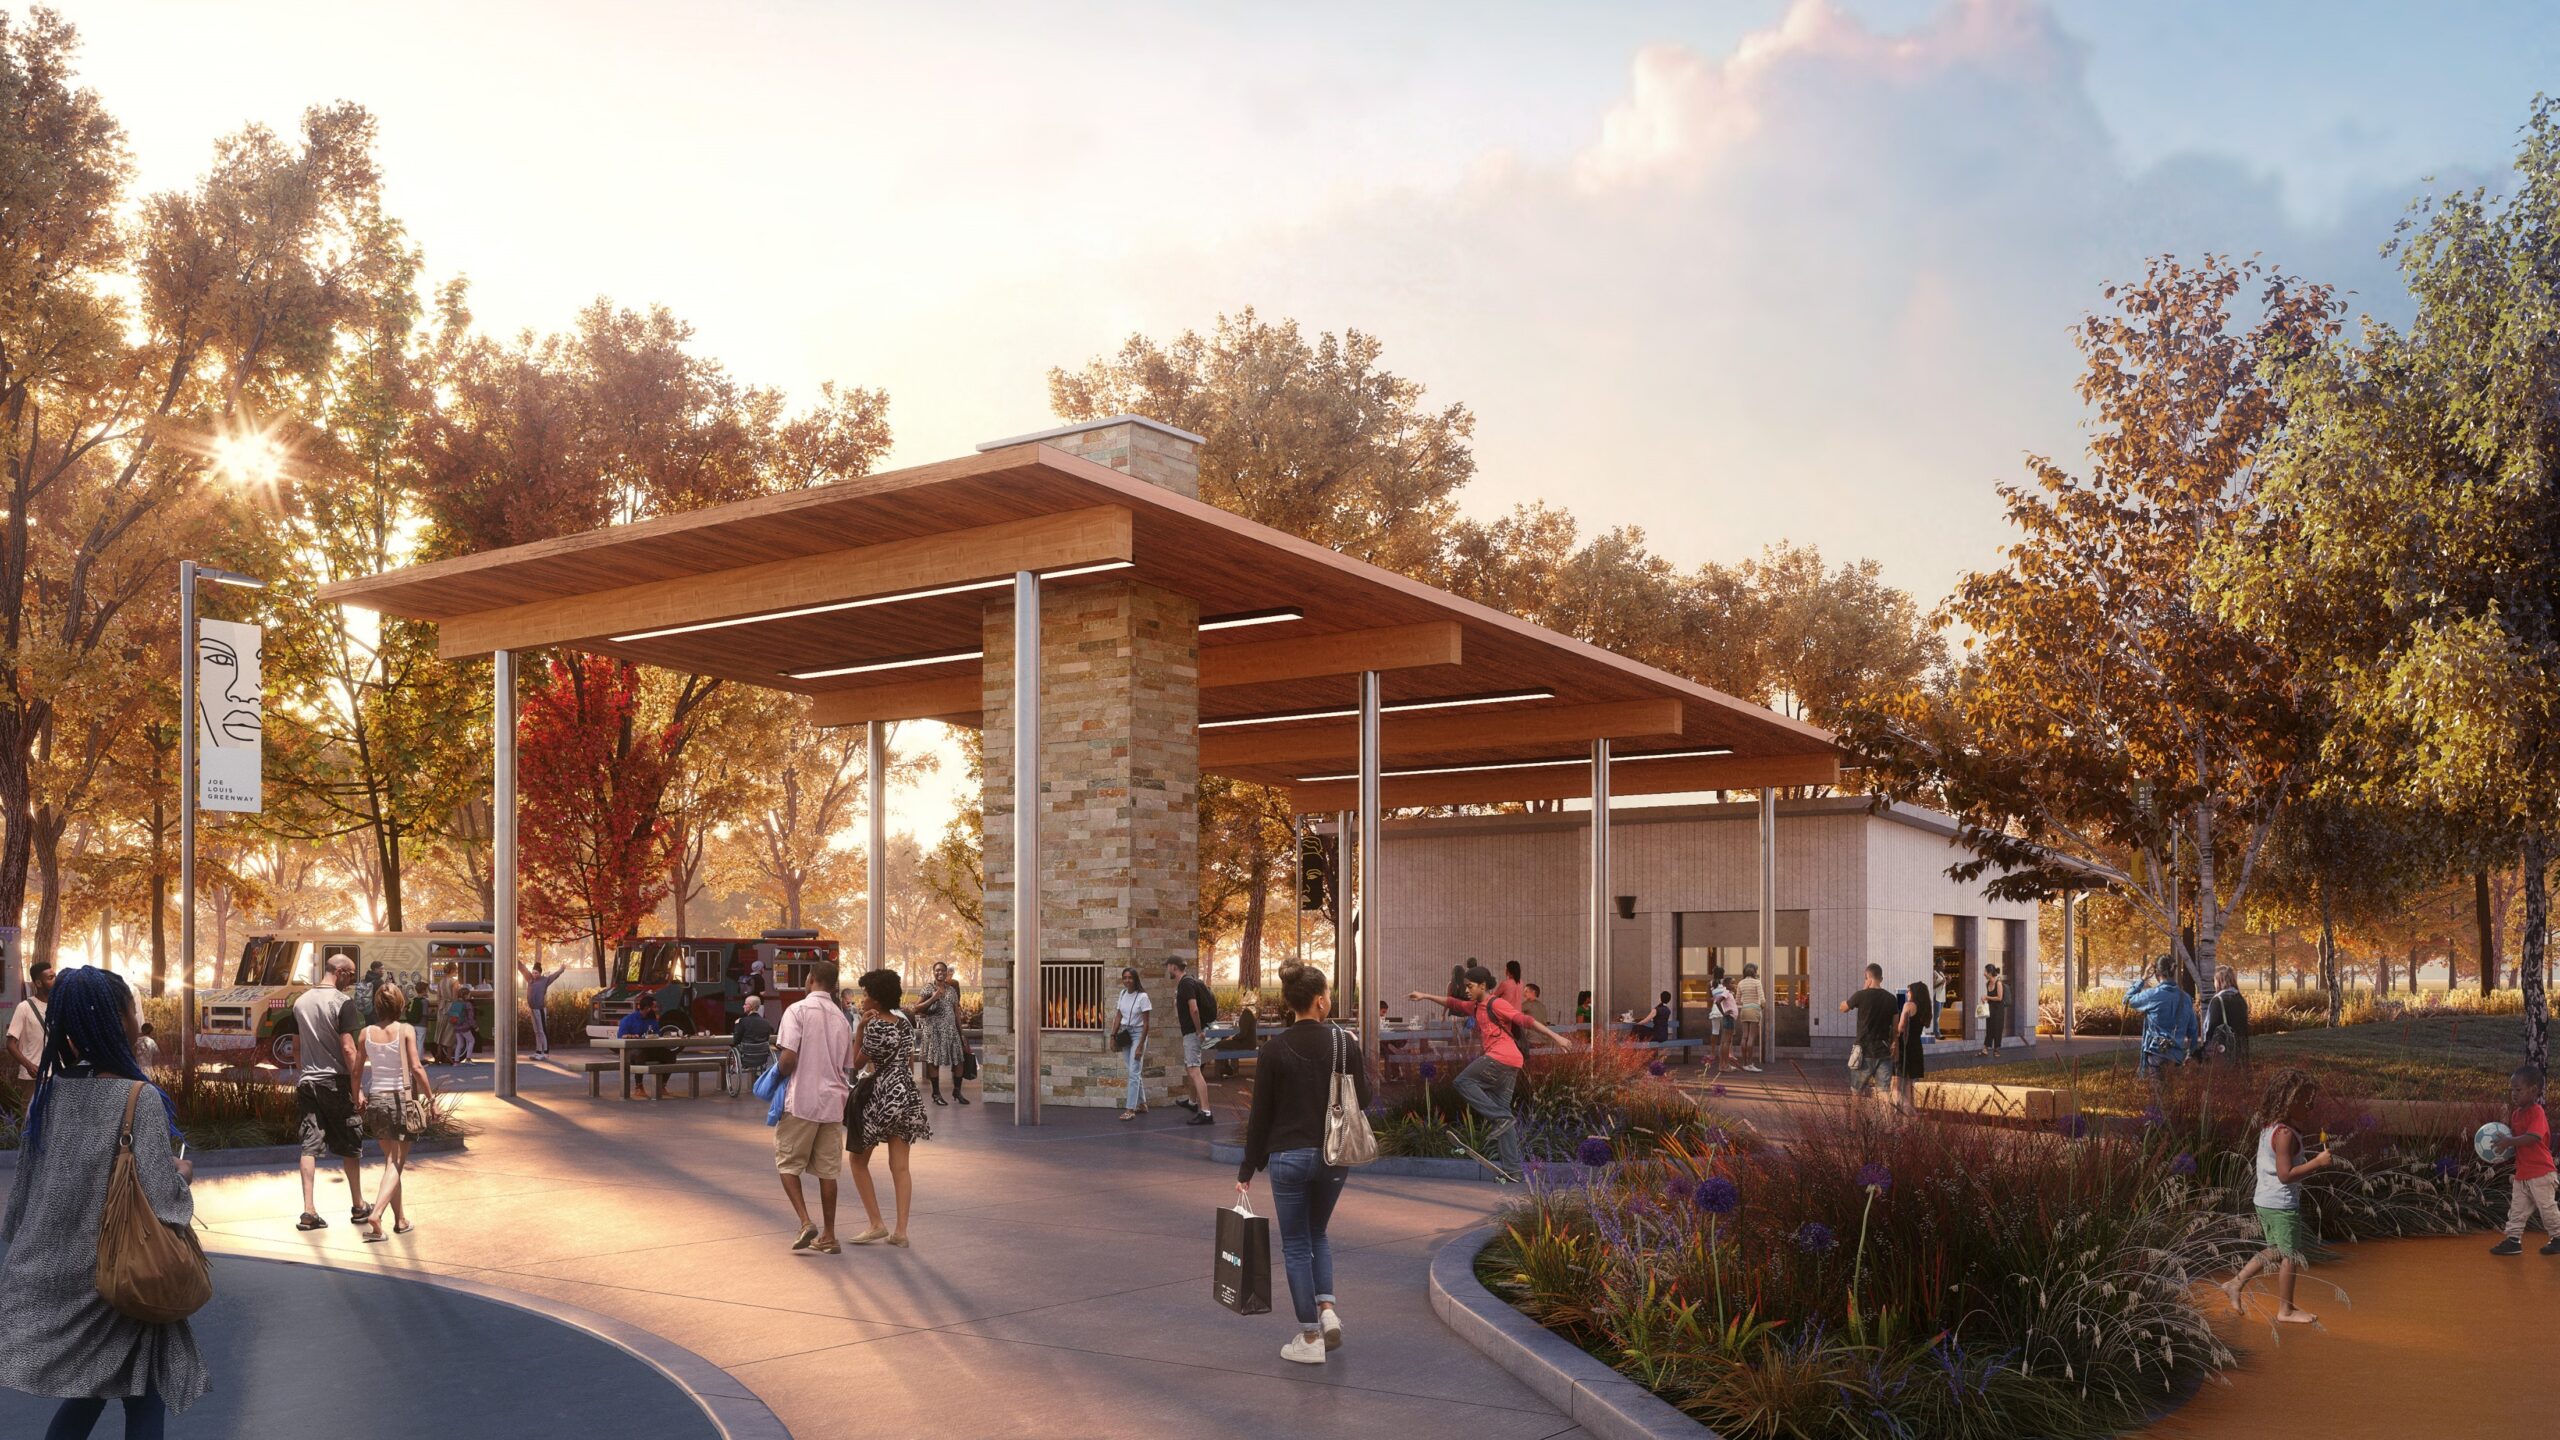 A rendering of the planned W Warren Ave pavilion